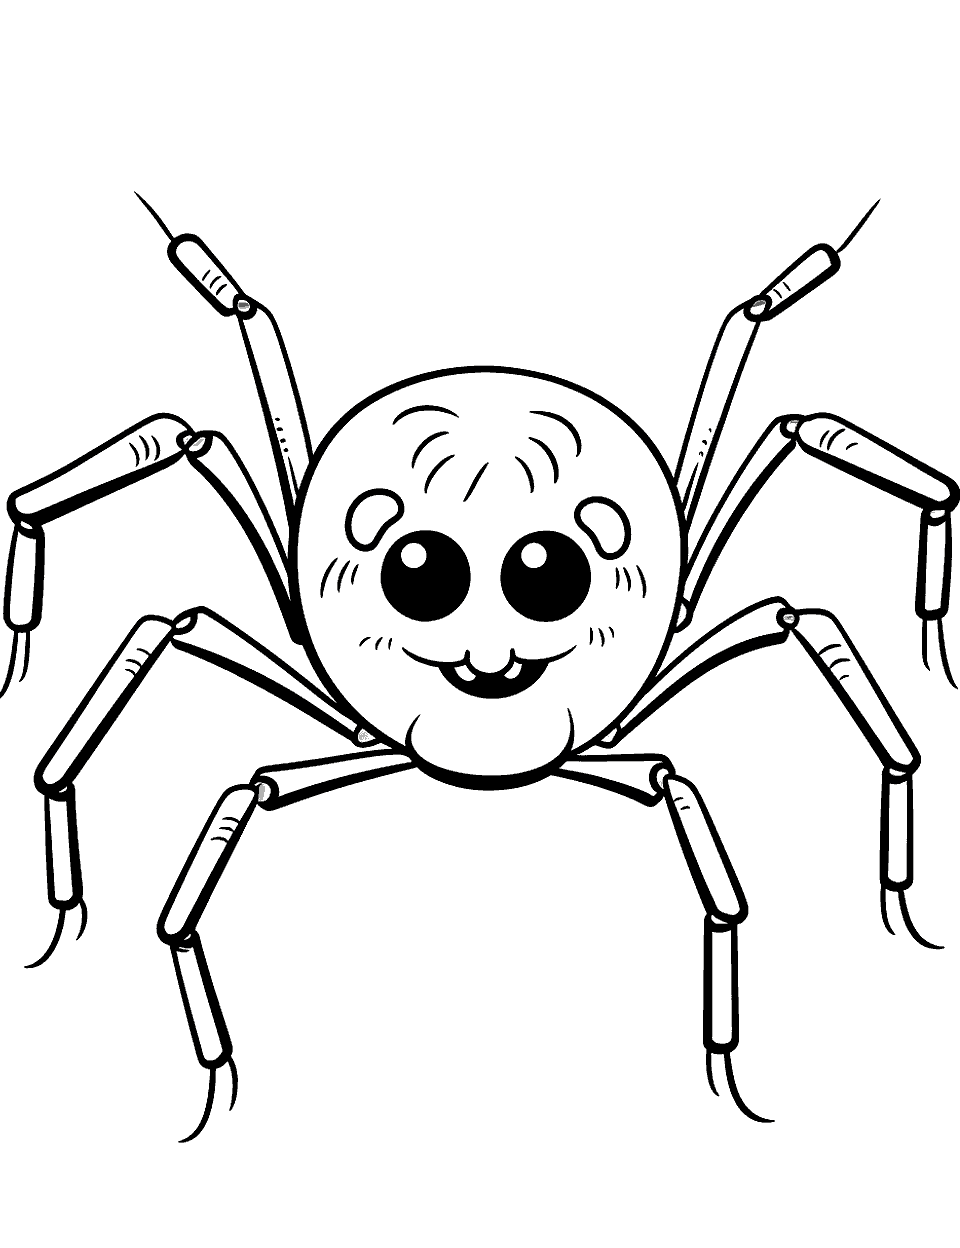 Creepy Spider Dancing Coloring Page - A creepy-looking spider dancing for Halloween.